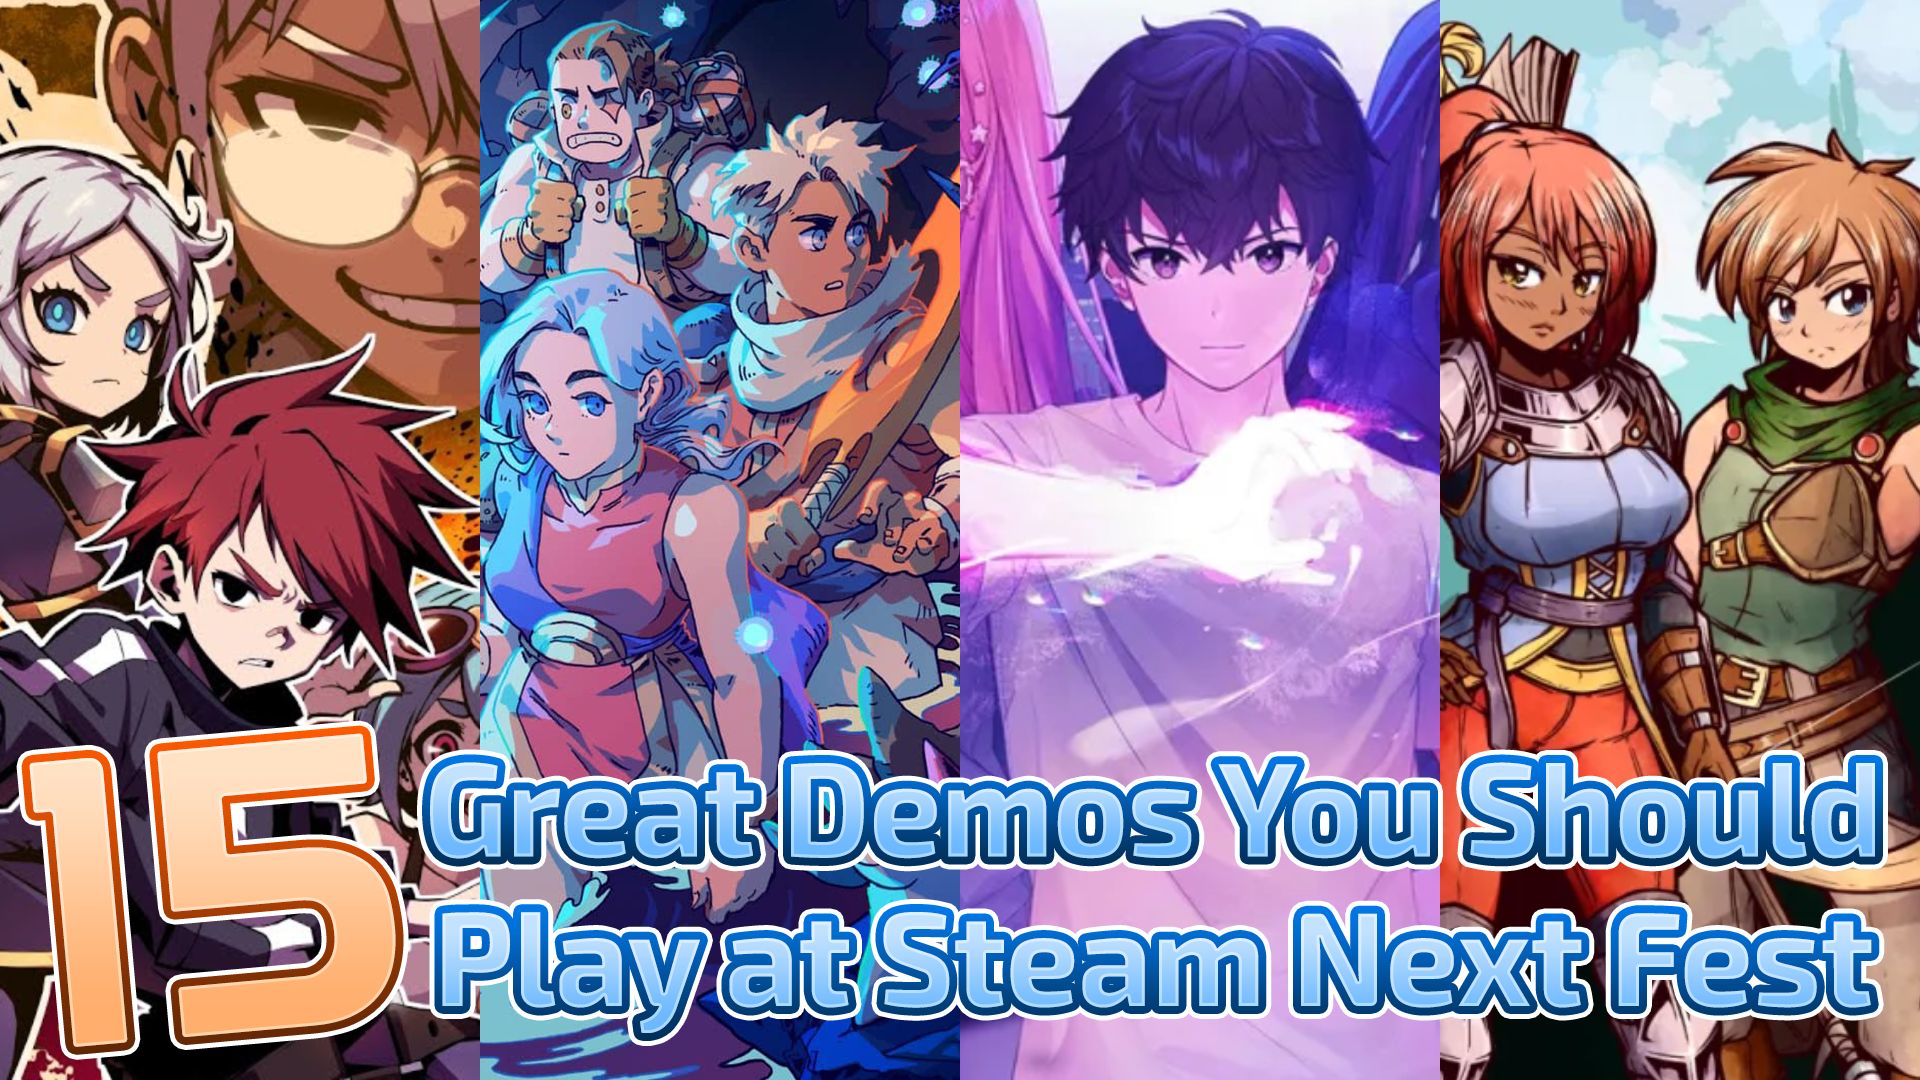 15 Demos You Should Play During Steam Next Fest